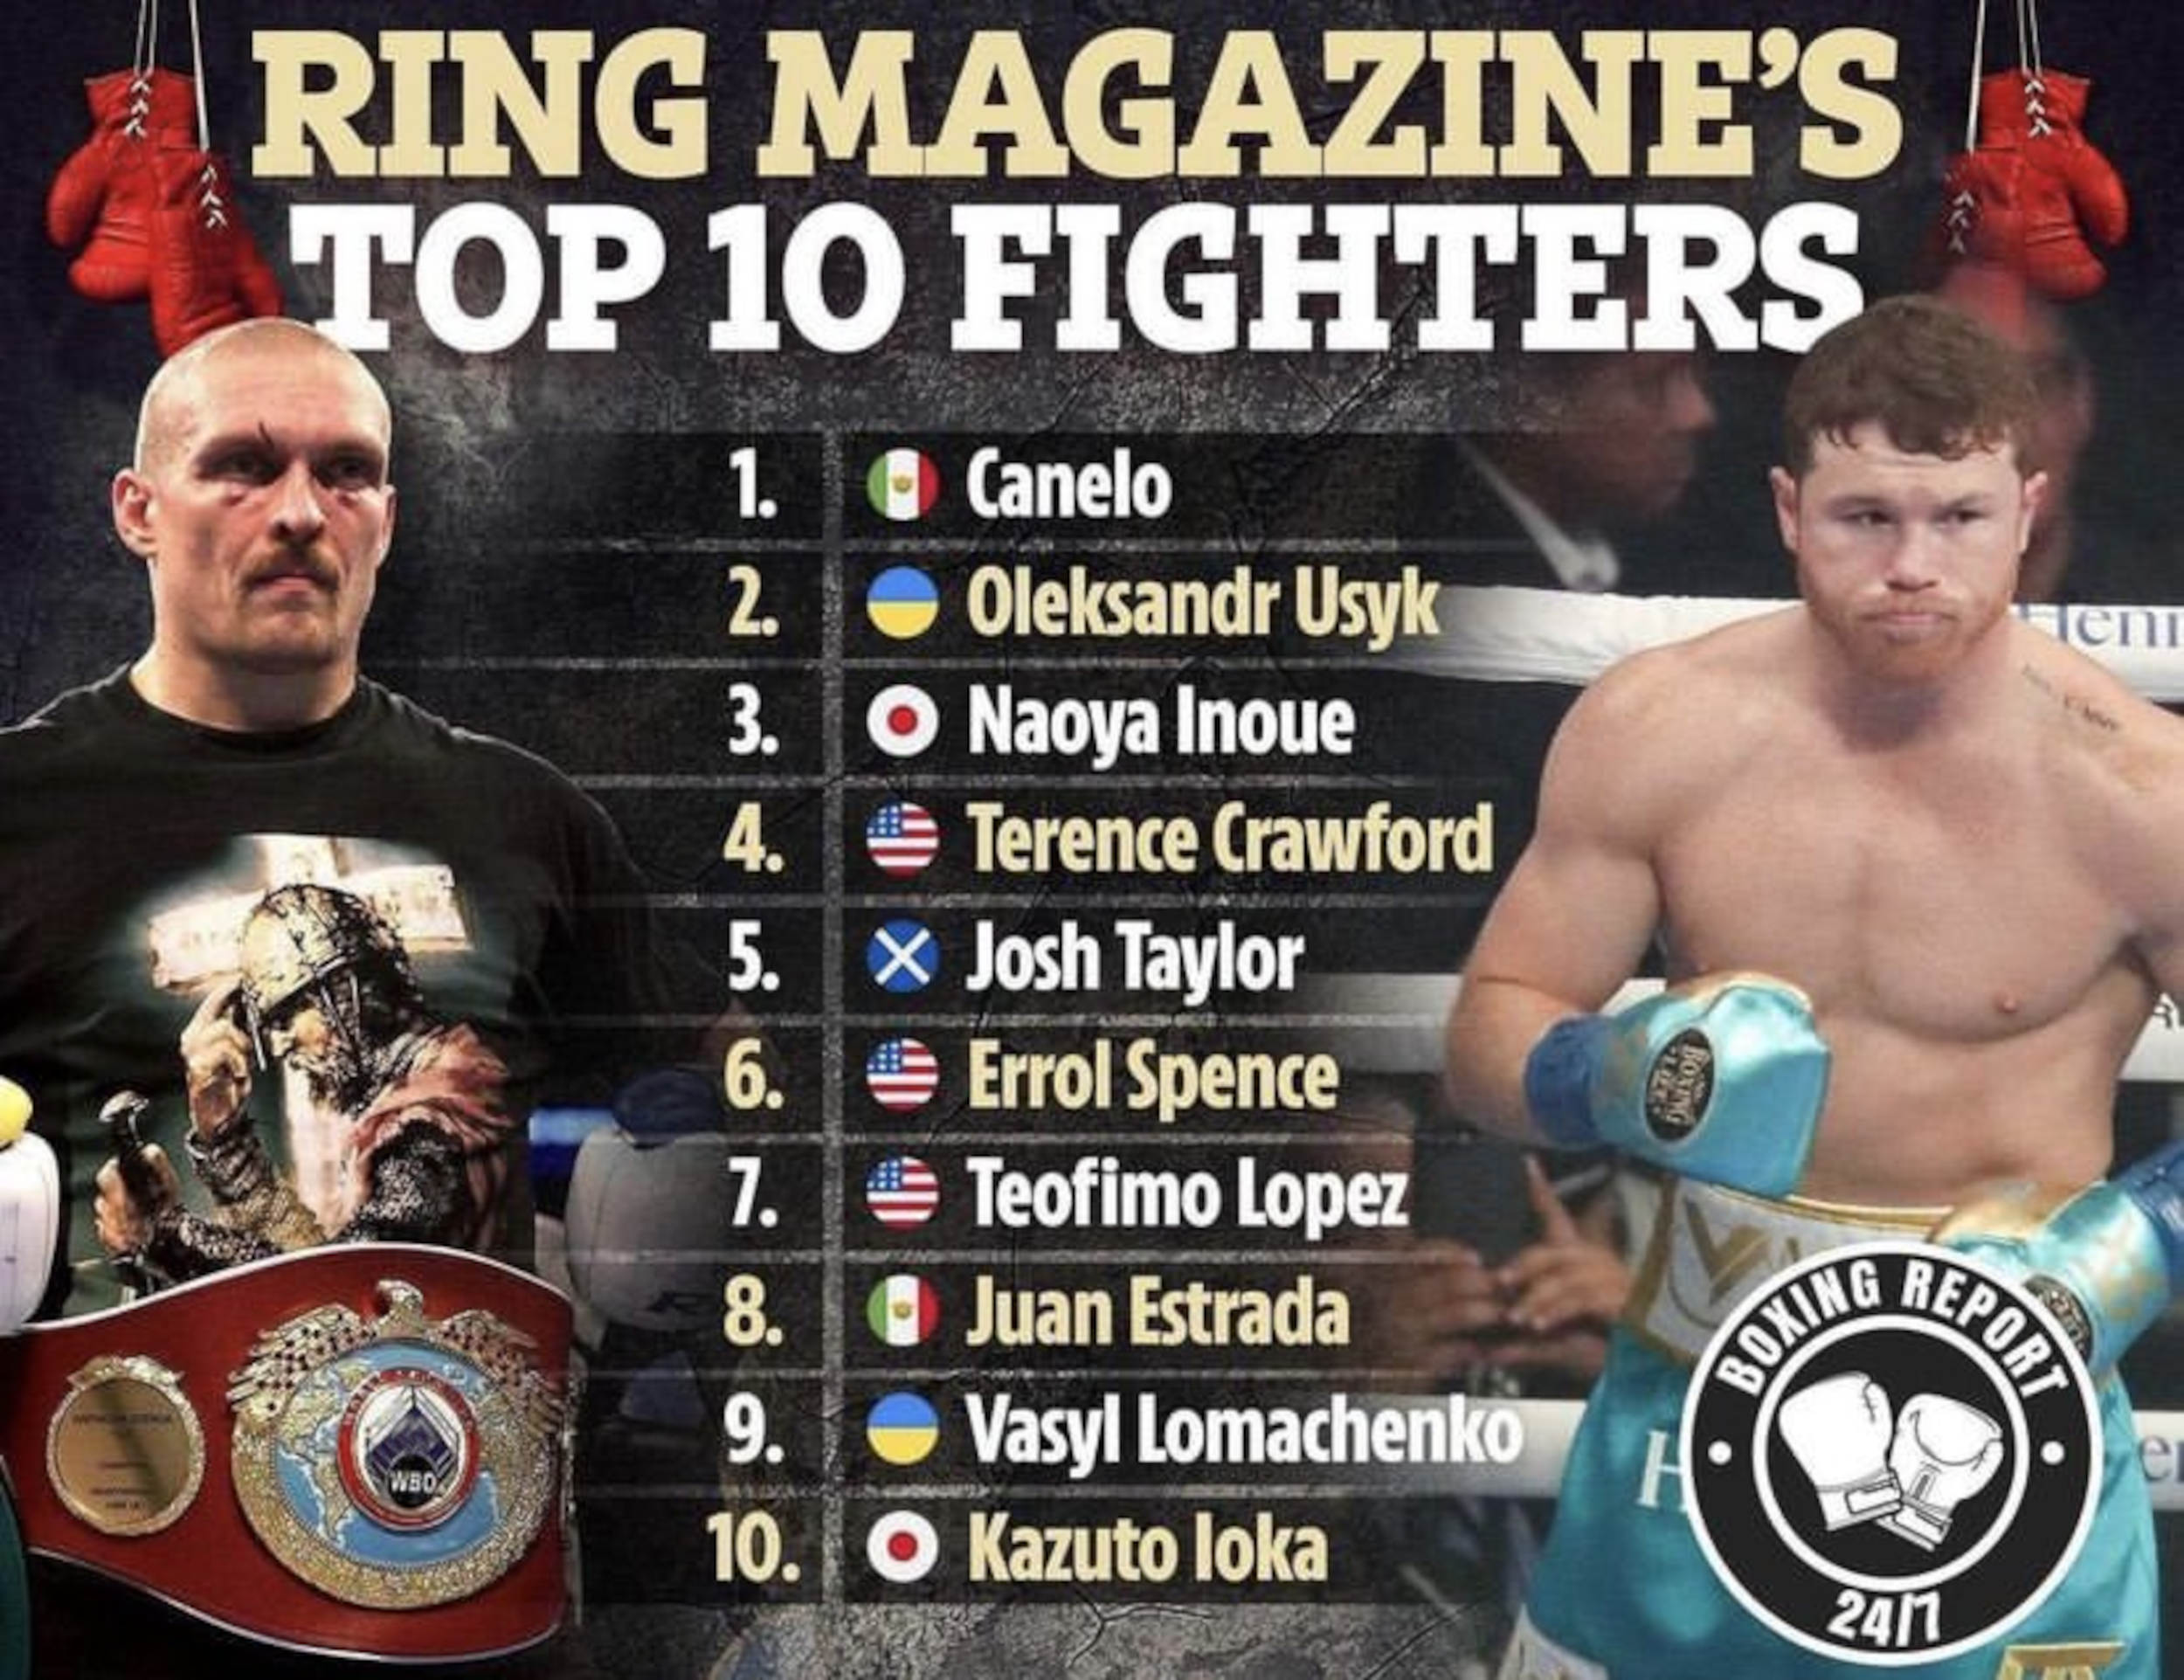 Ring Magazine included Josh Taylor in their top 10 fighters